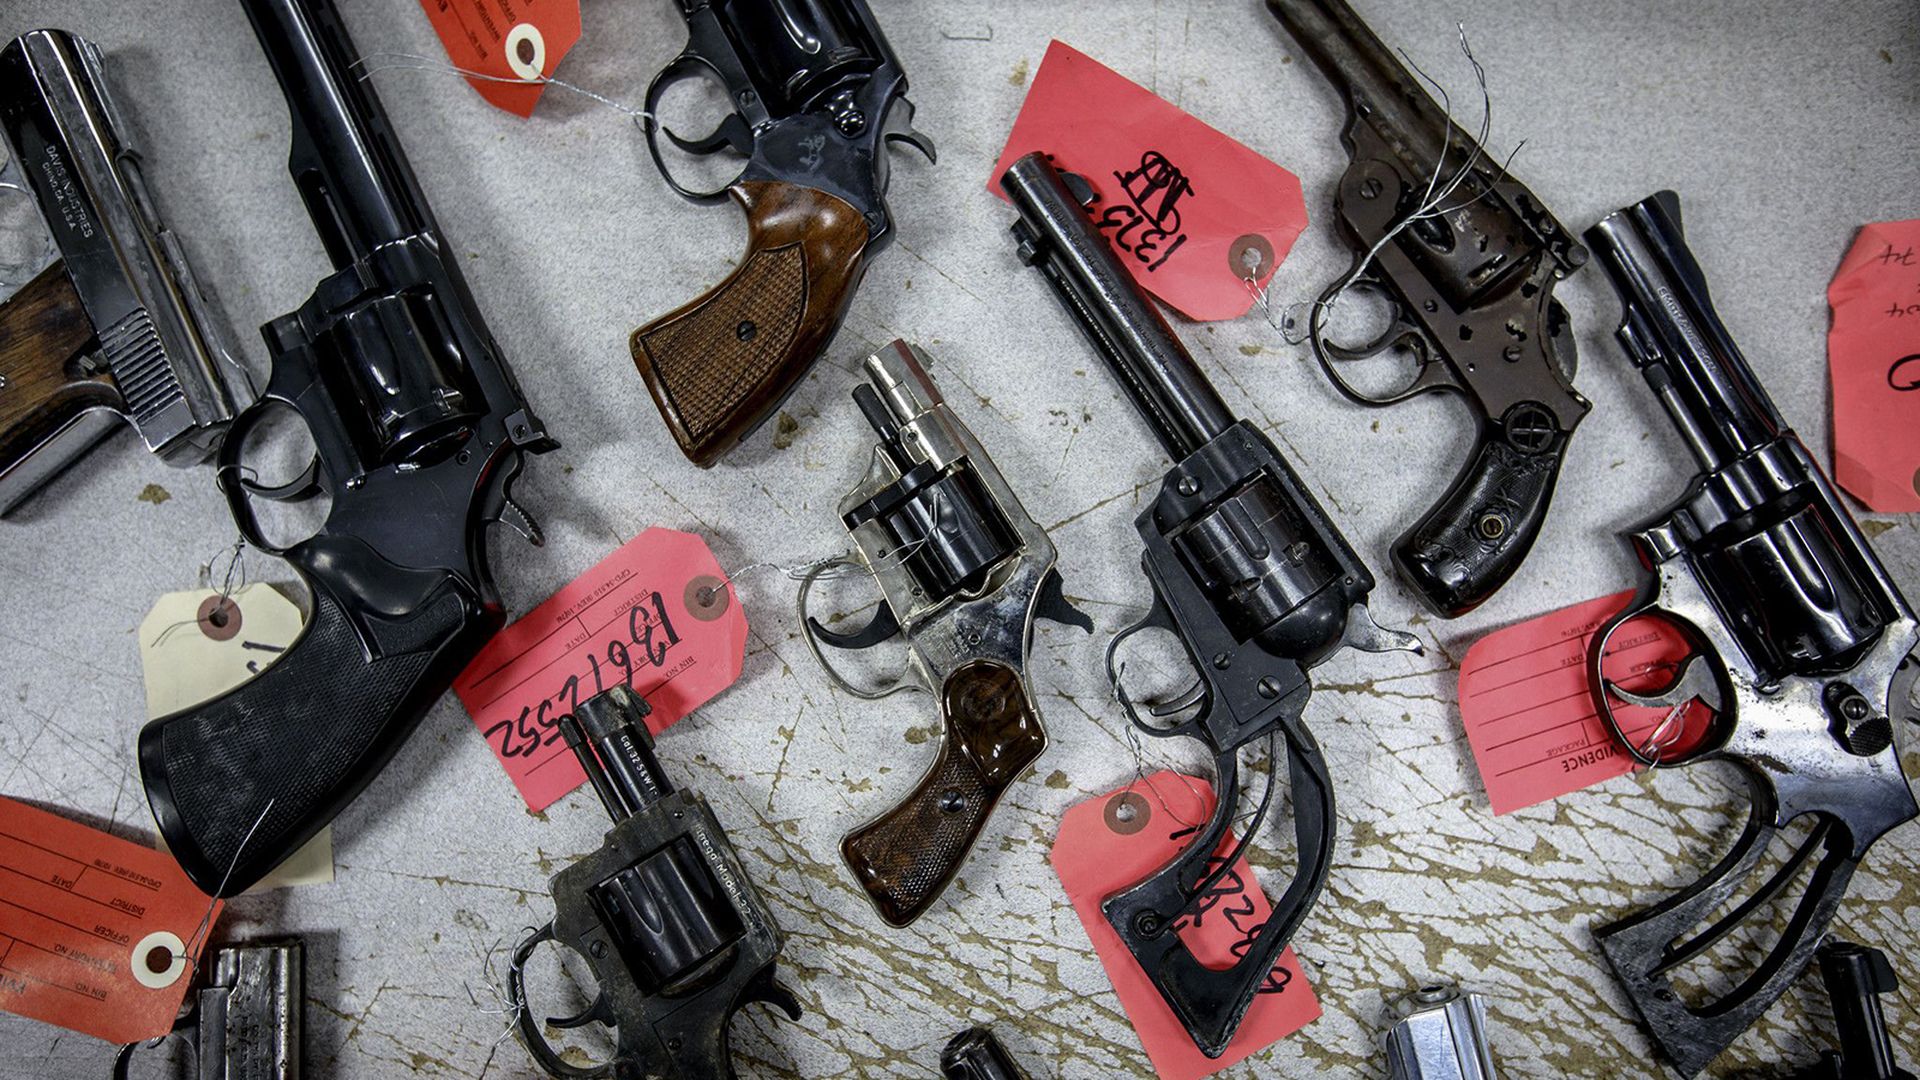 Handguns being processed for potential evidence in the Chicago Police Department in 2017.